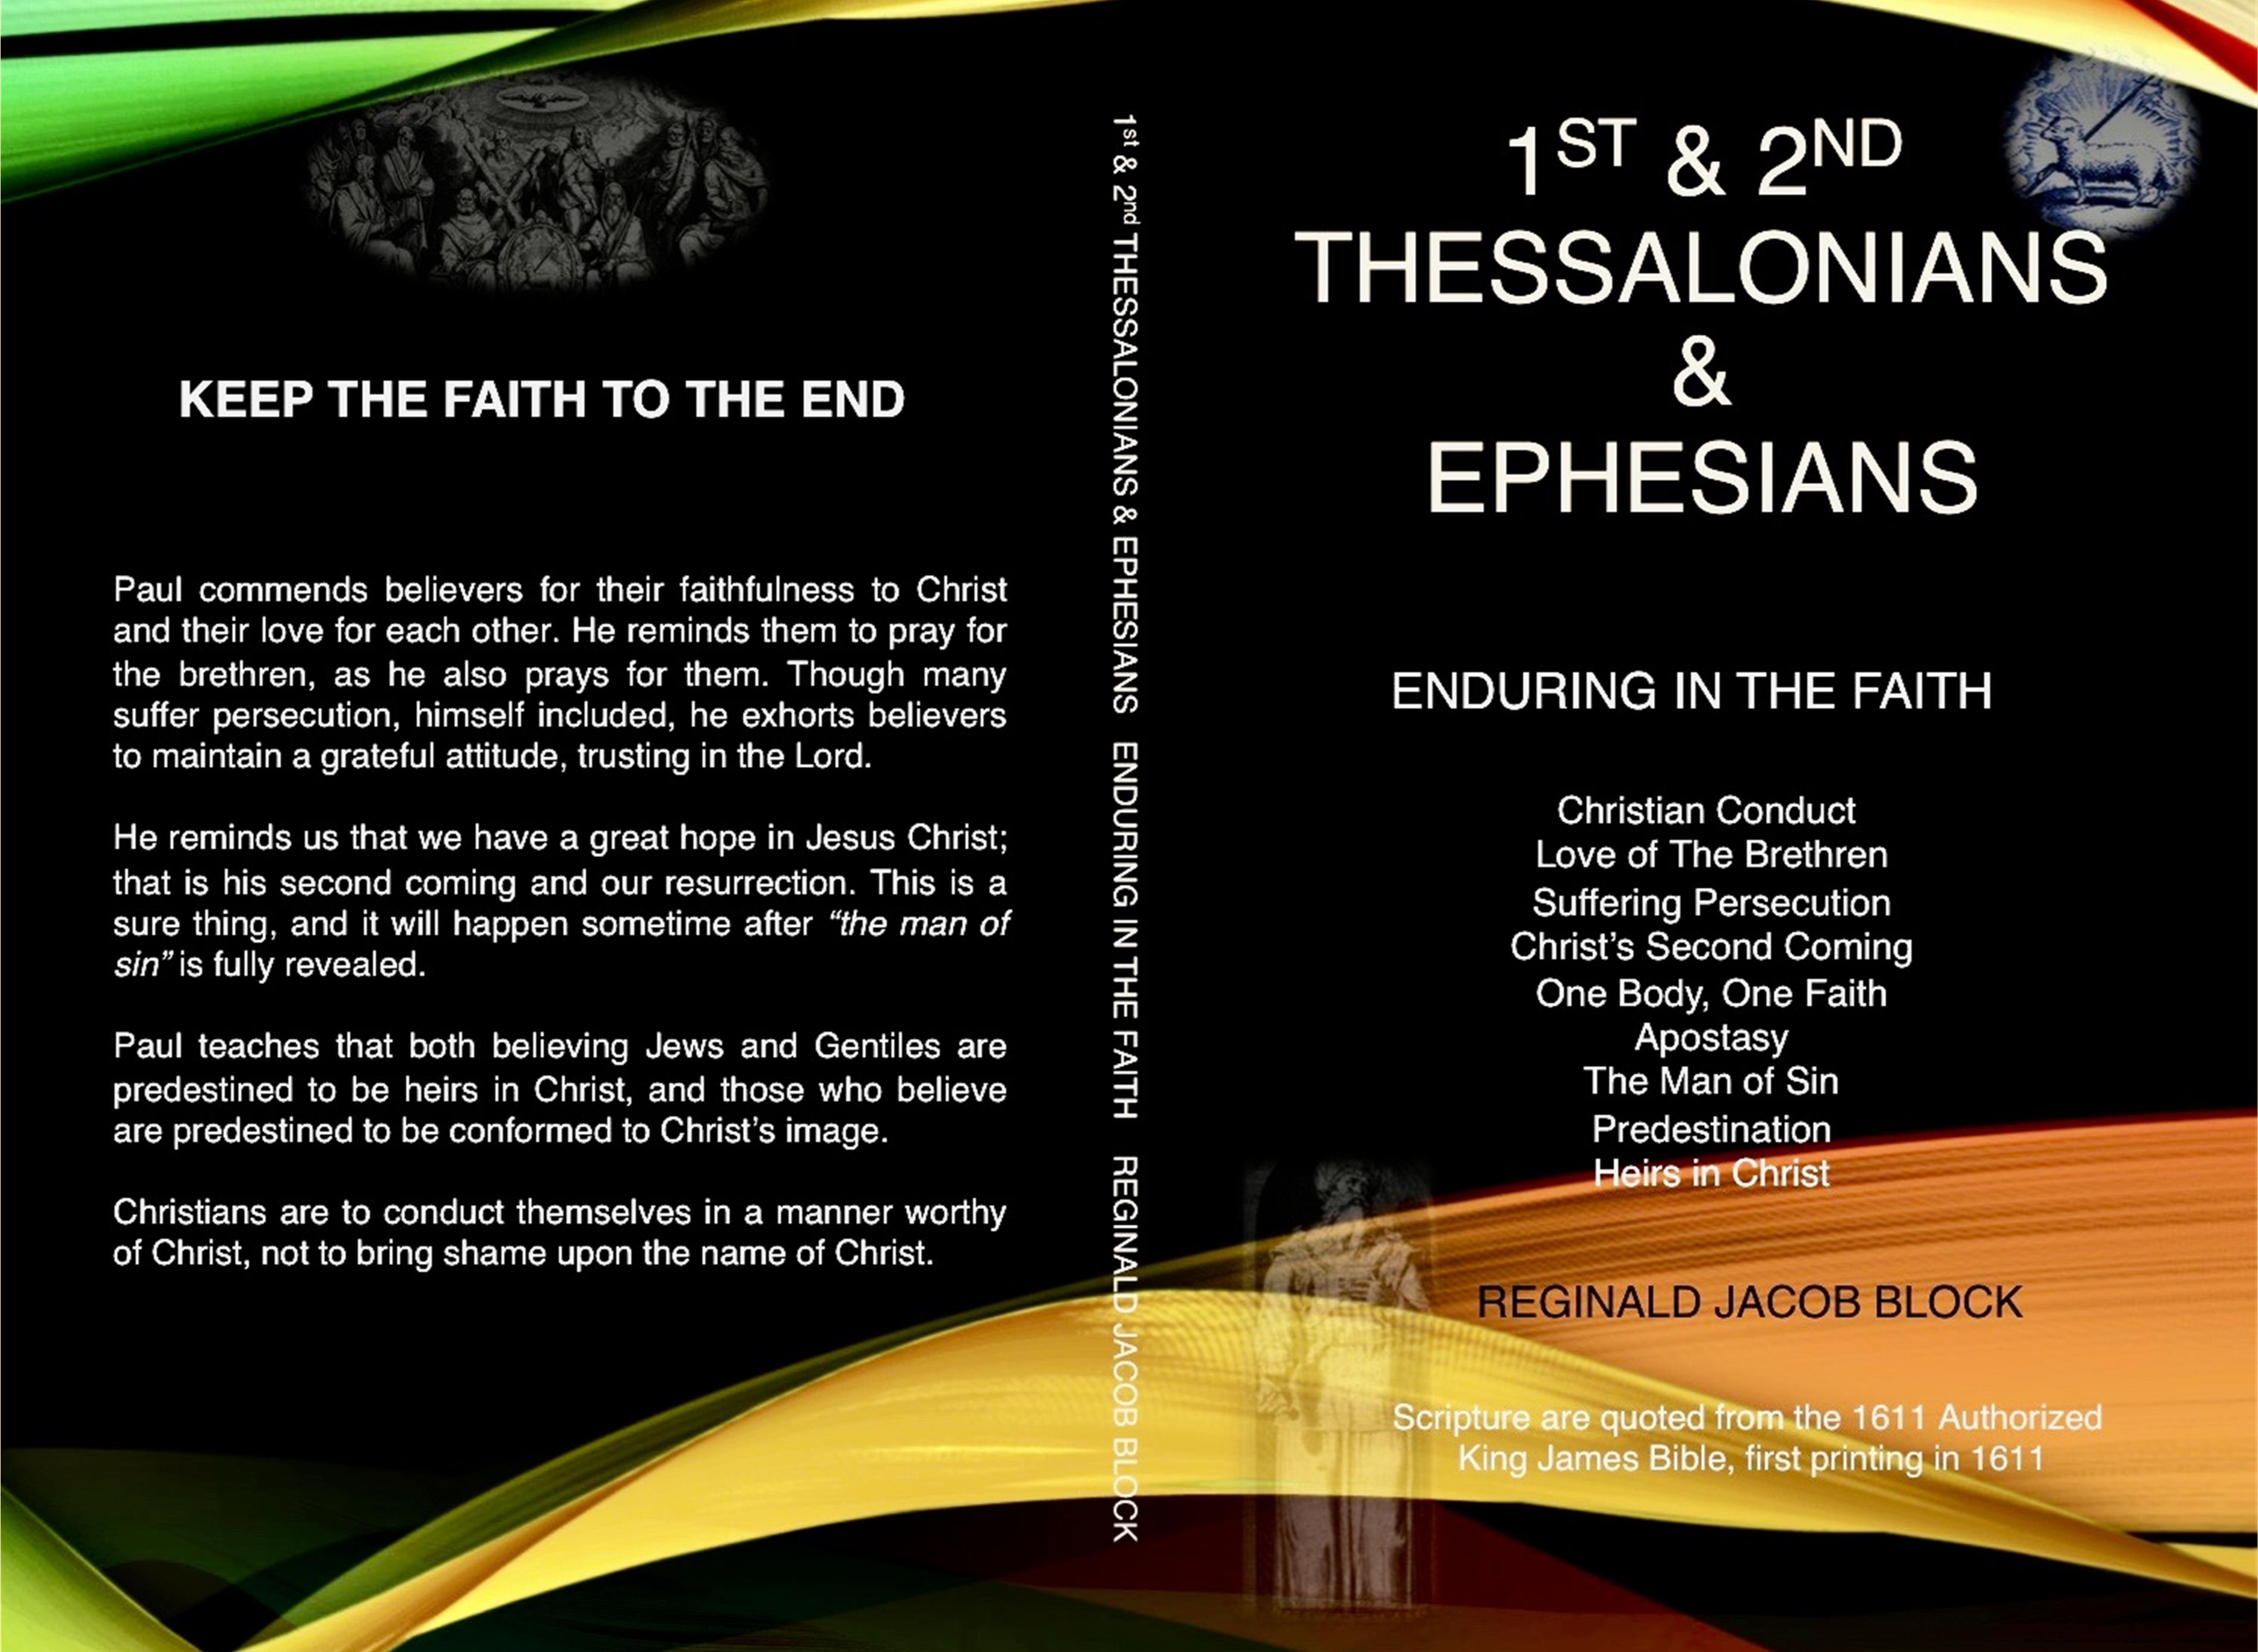 1st & 2nd Thessalonians & Ephesians Enduring In The Faith cover image